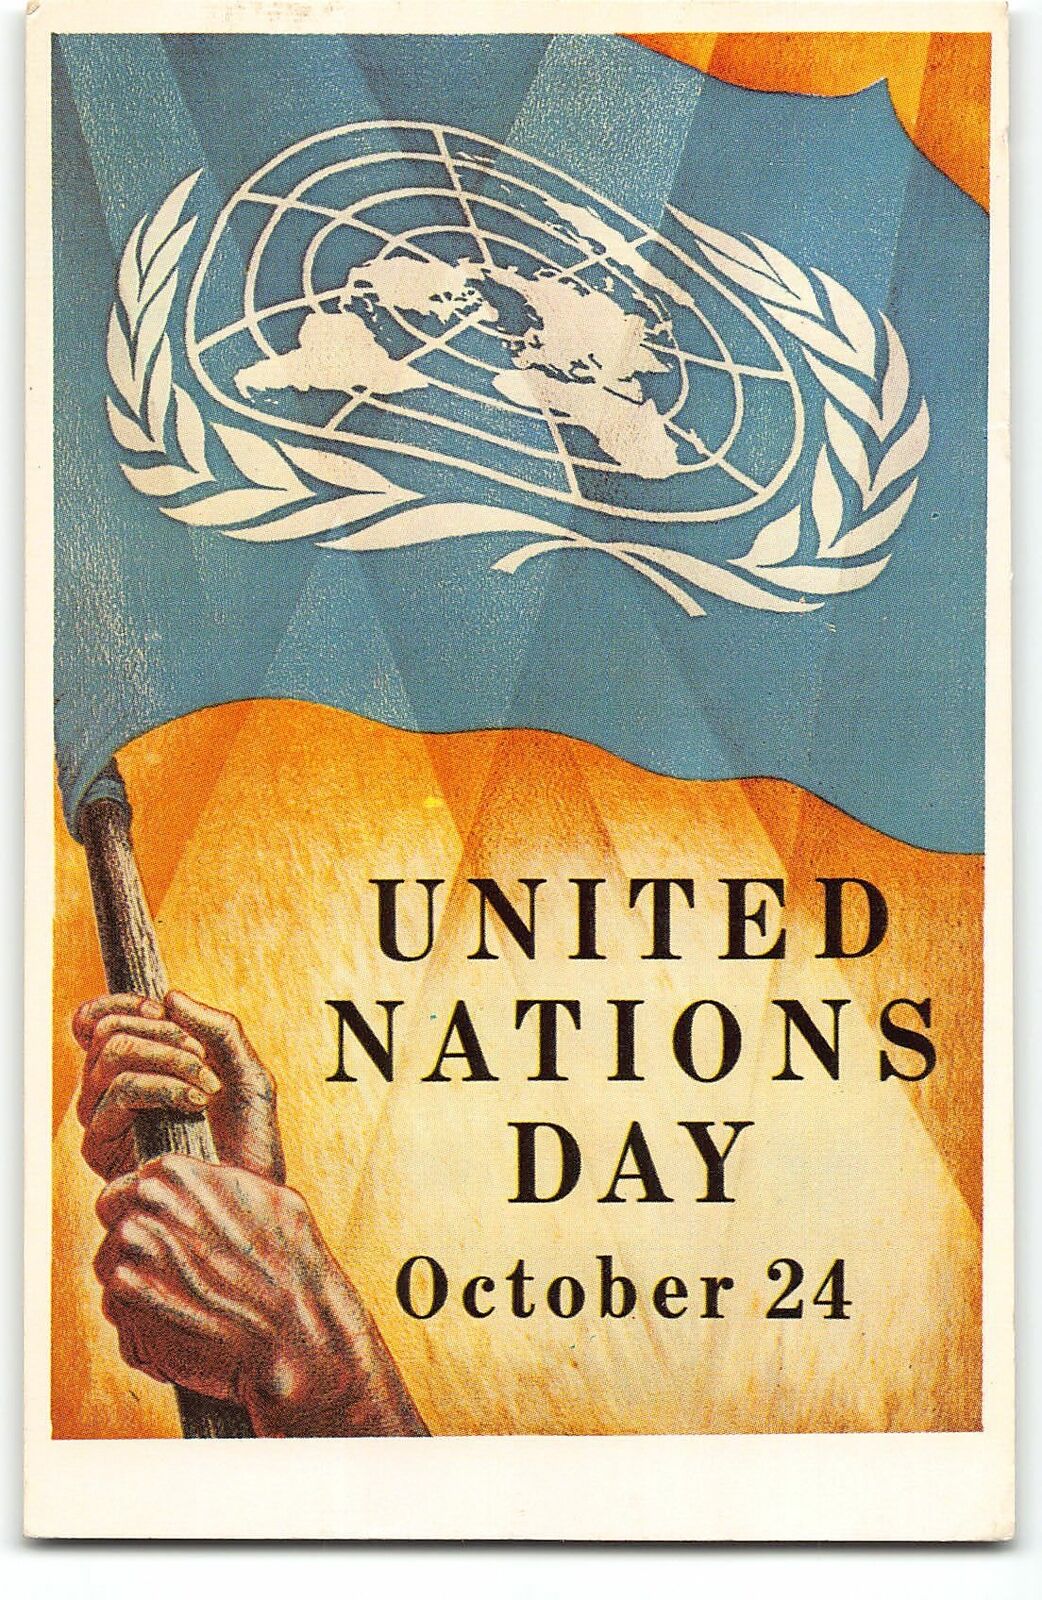 United Nations Day, Oct 24 1963 - posted on Oct 24 with UN Stamp and Cancel